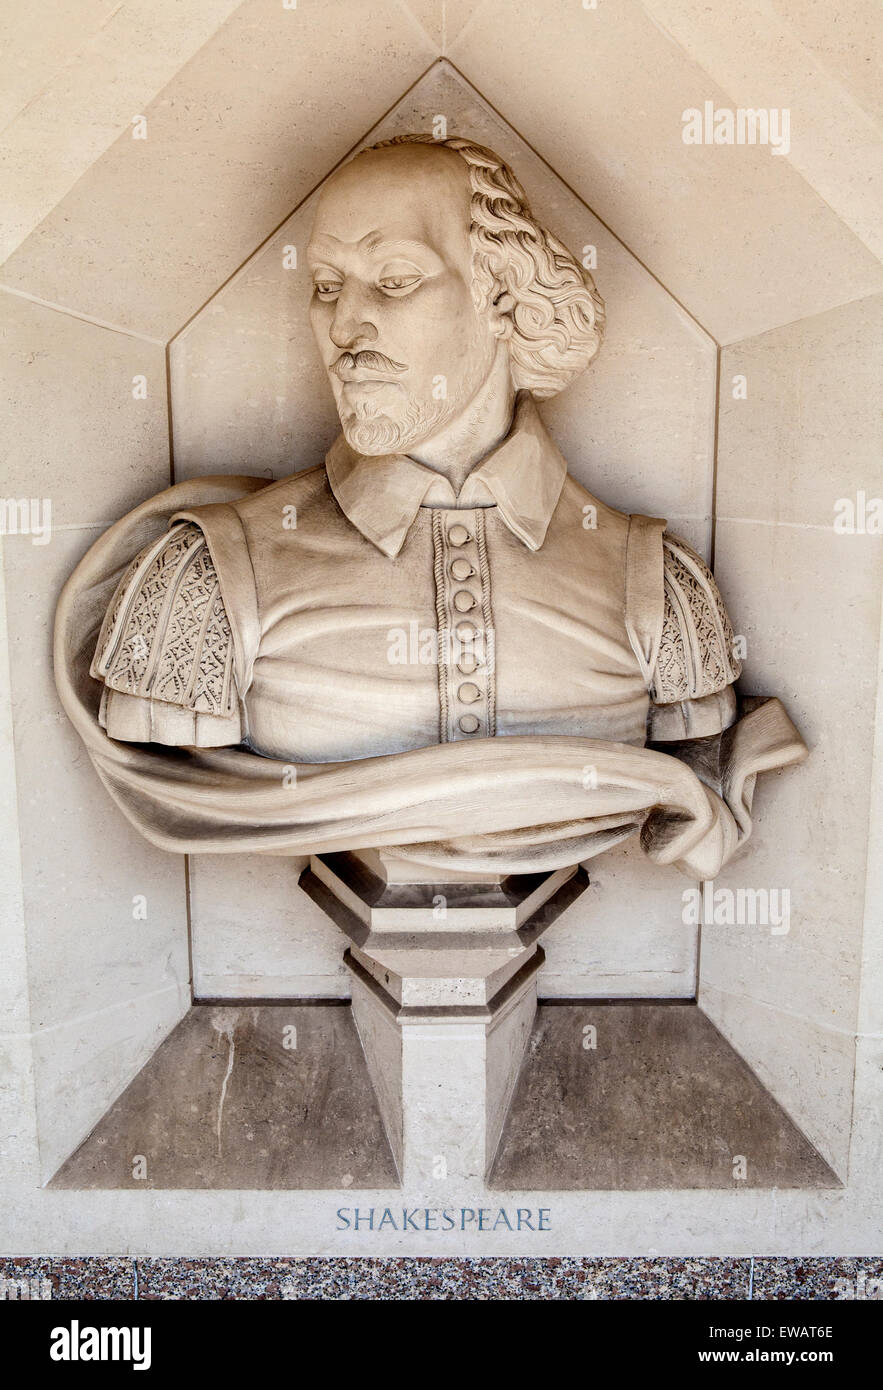 A sculpture of famous playwright William Shakespeare situated outside Guildhall Art Gallery in London. Stock Photo